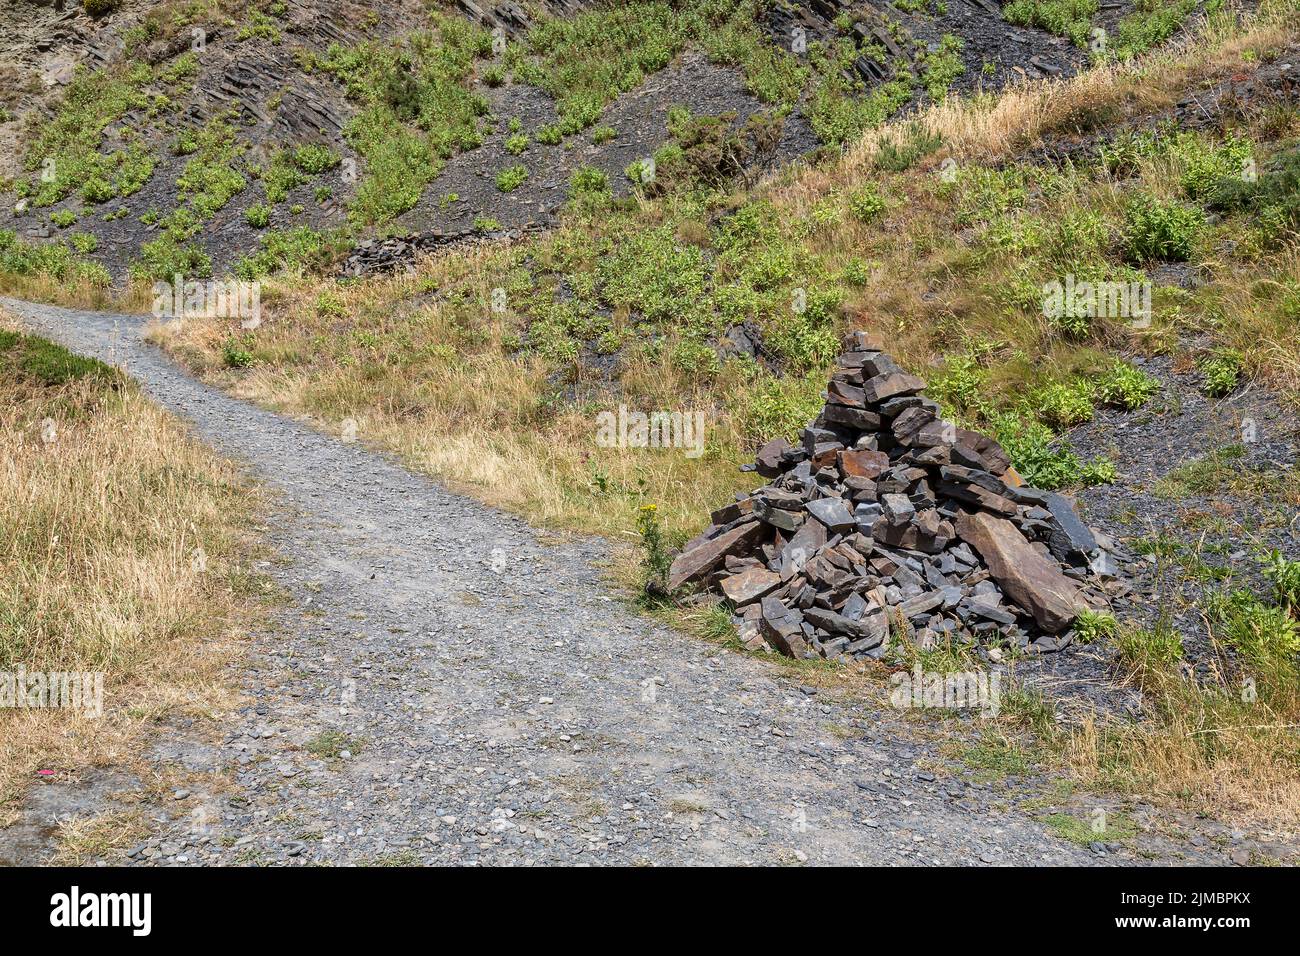 A pile of rocks or cairn is used to mark the path on a mountain or rough terrain.Health, fitness, walking, hiking or active leisure time concept. Stock Photo